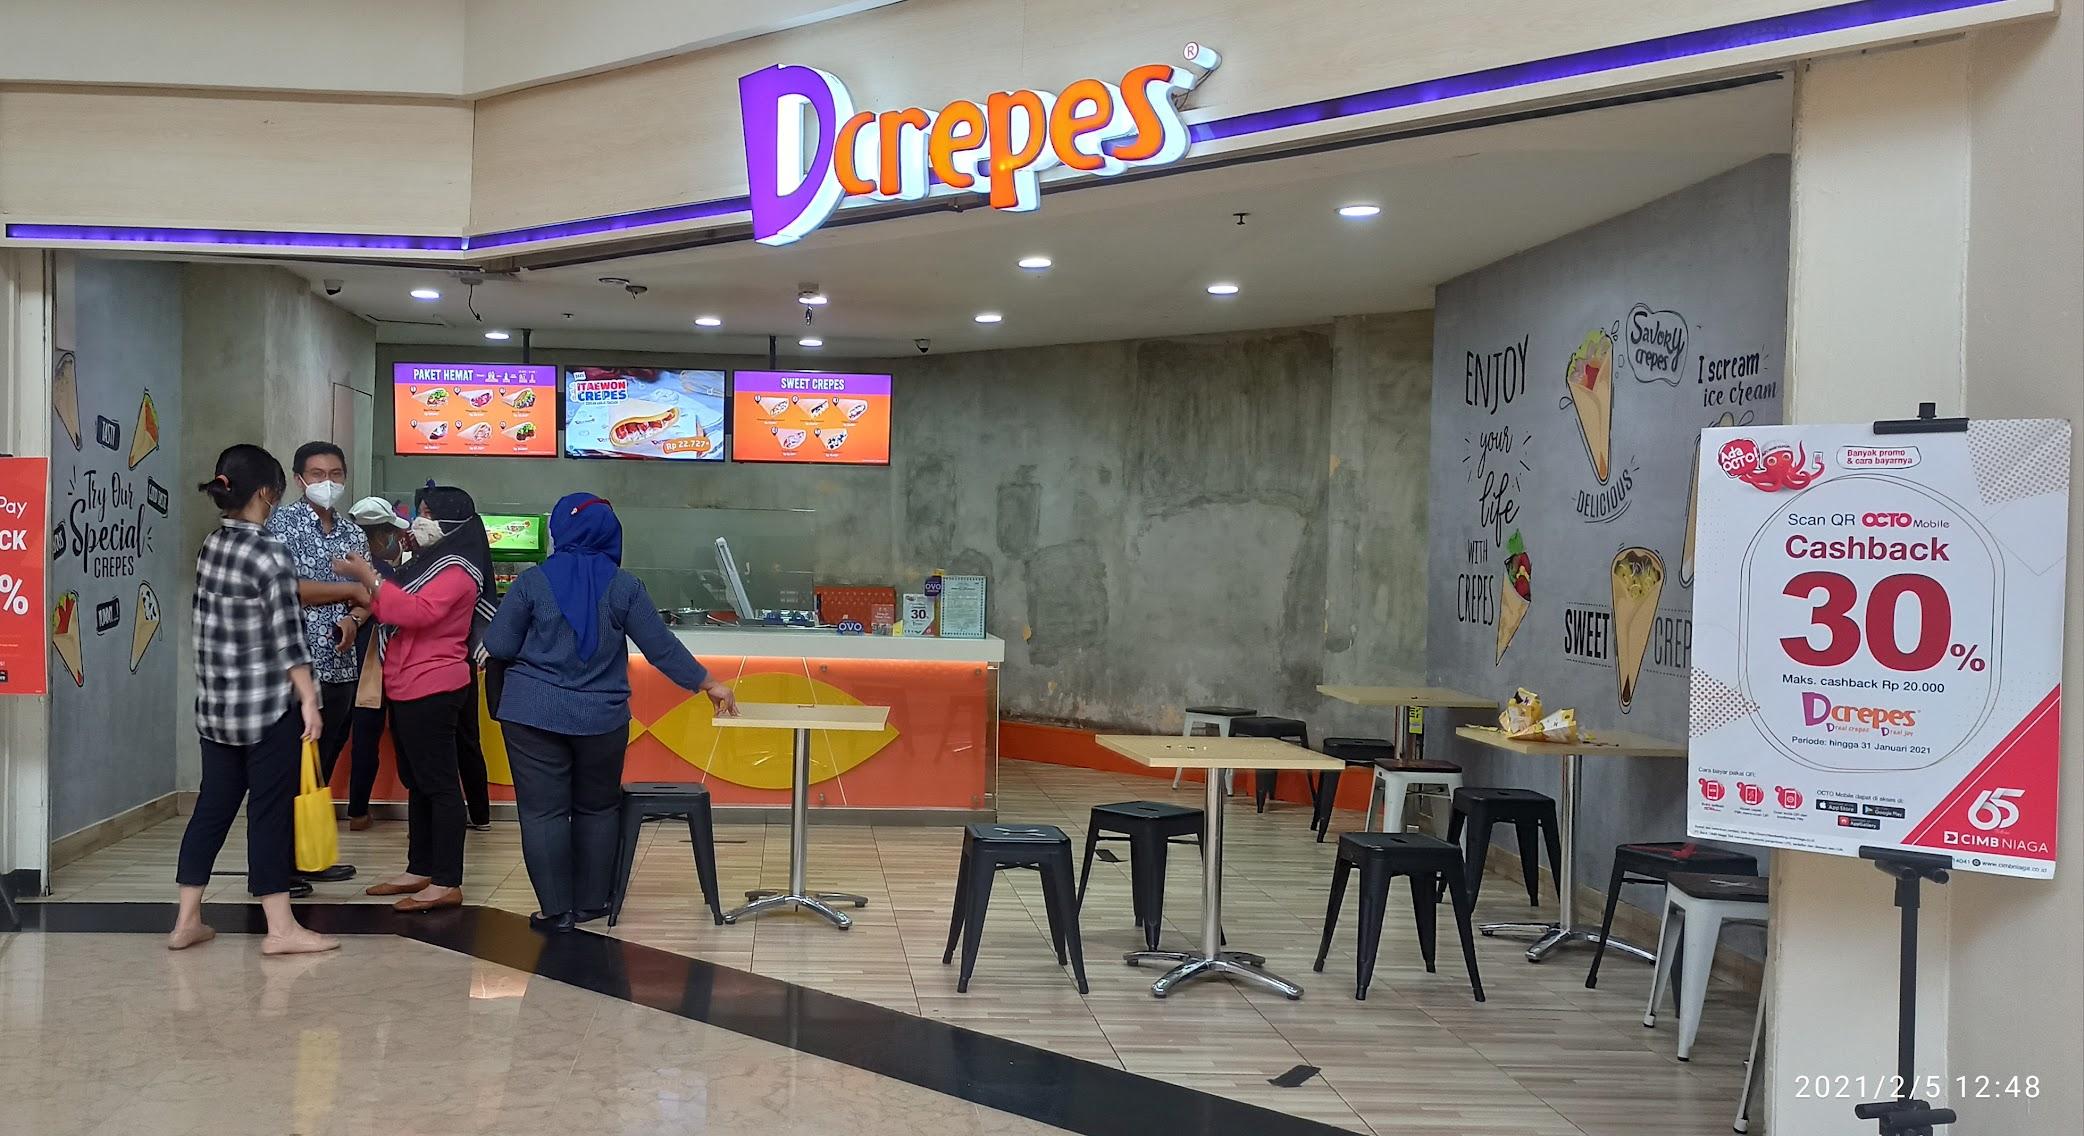 D'Crepes - Puri Indah Mall review